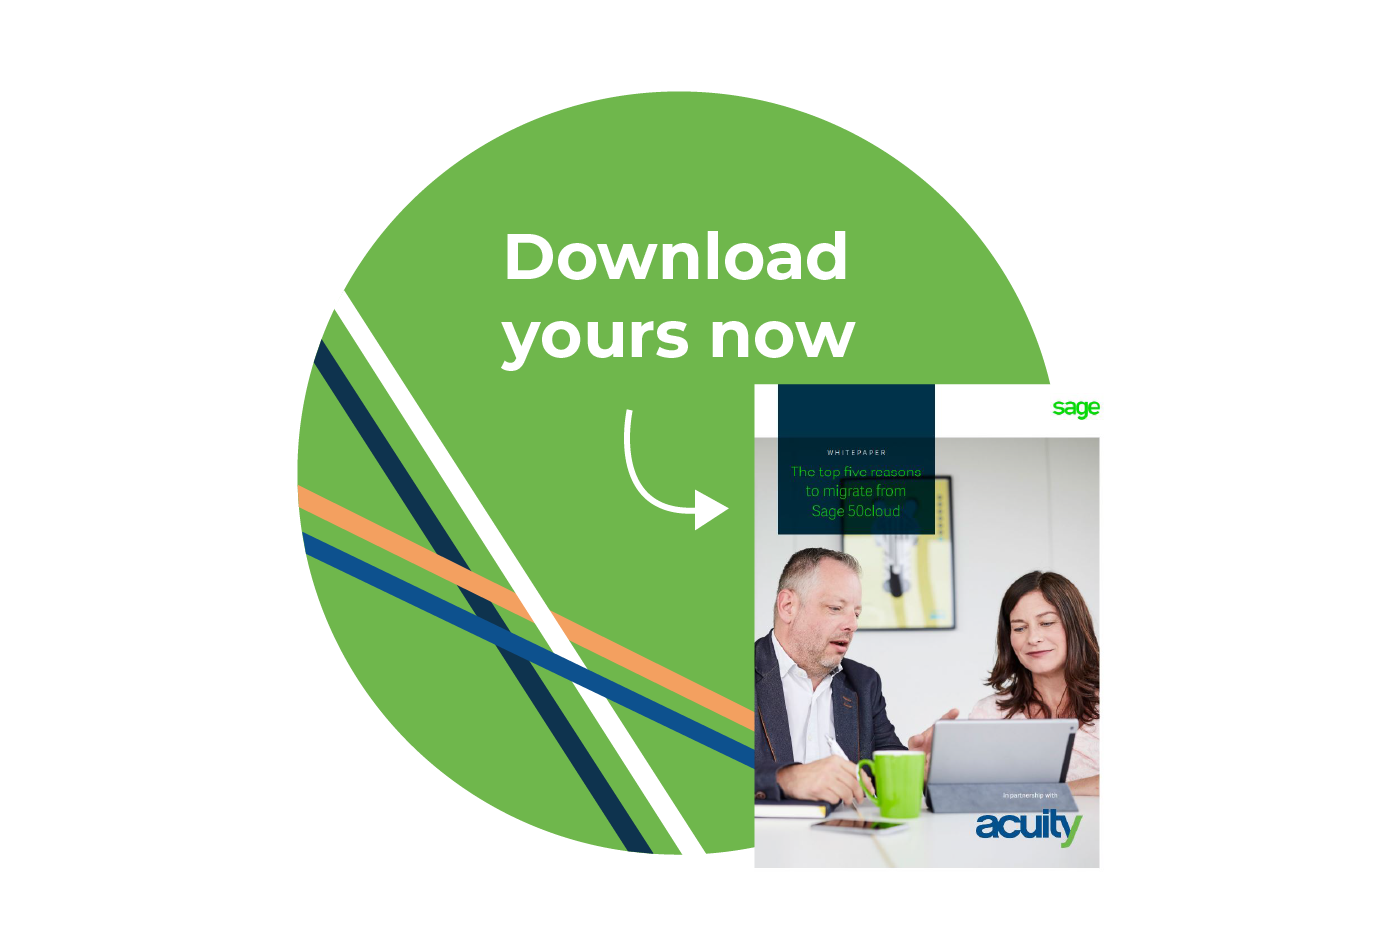 Download whitepaper - migrate from Sage 50